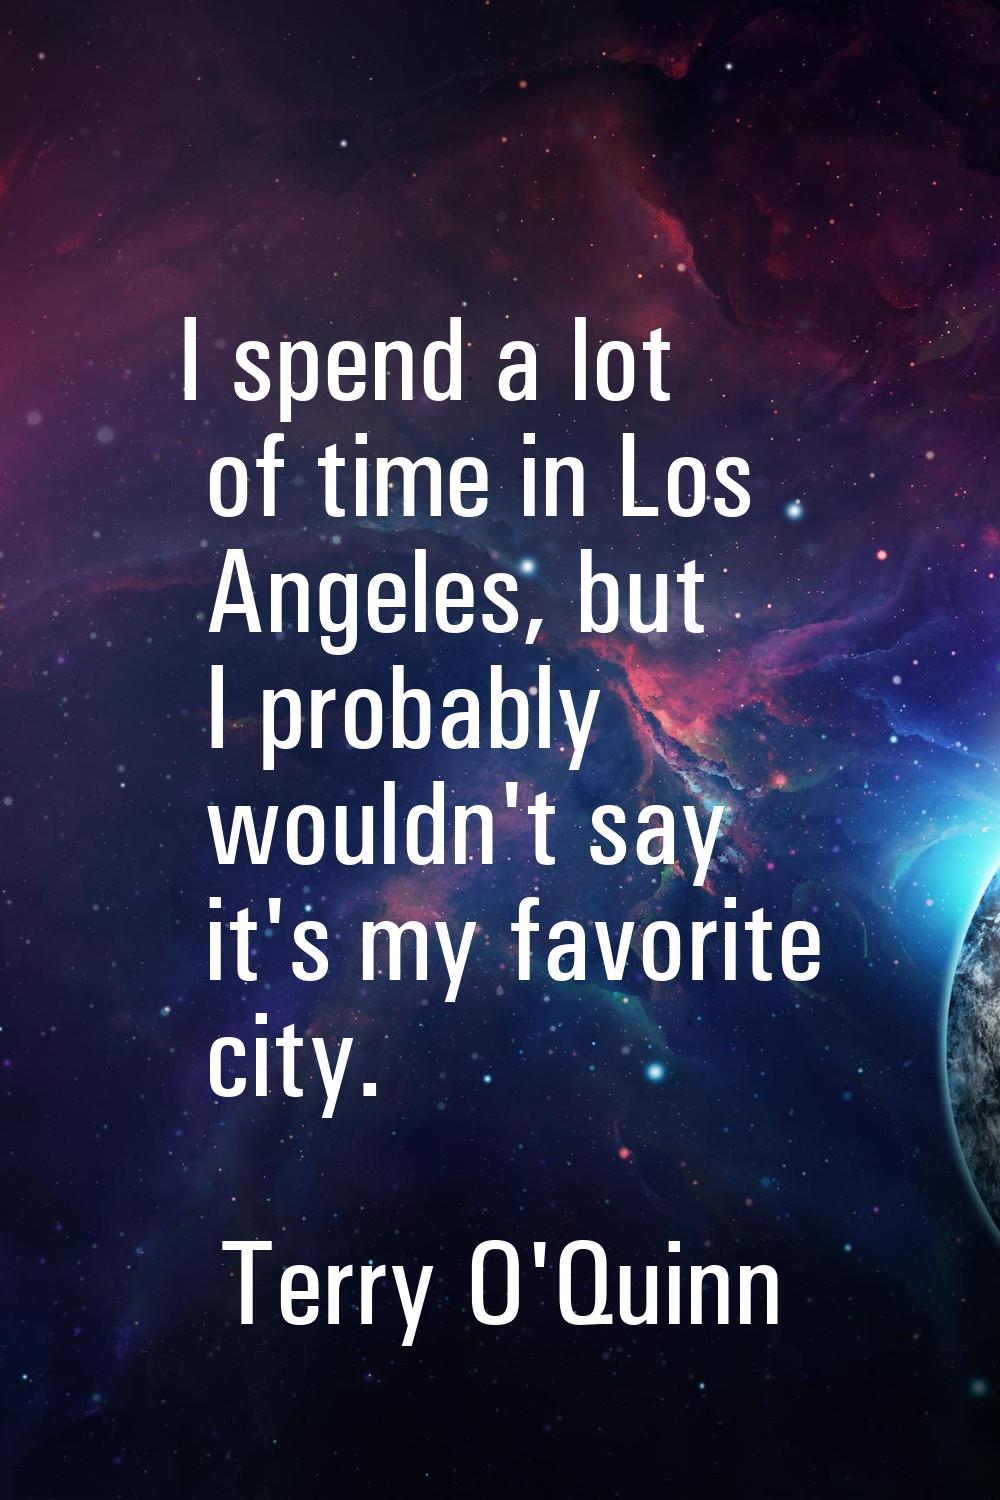 I spend a lot of time in Los Angeles, but I probably wouldn't say it's my favorite city.